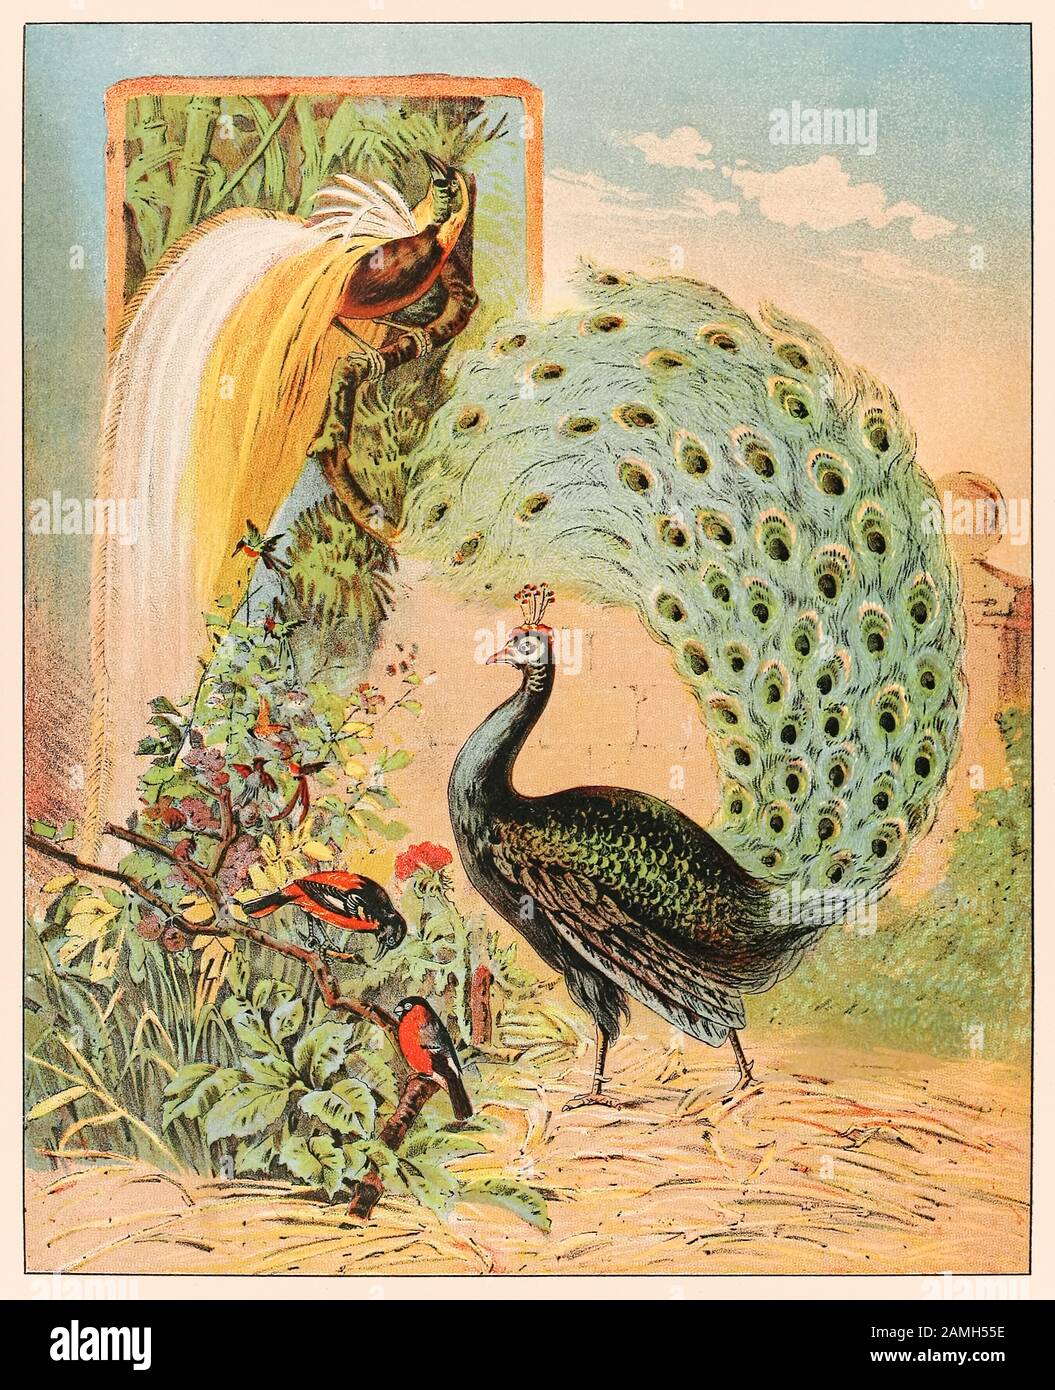 A peacock amongst other exotic birds in the aviary of the Barnum & Bailey Circus from P.T. Barnum’s Menagerie published in 1888, illustration by Sarah J. Burke. Stock Photo